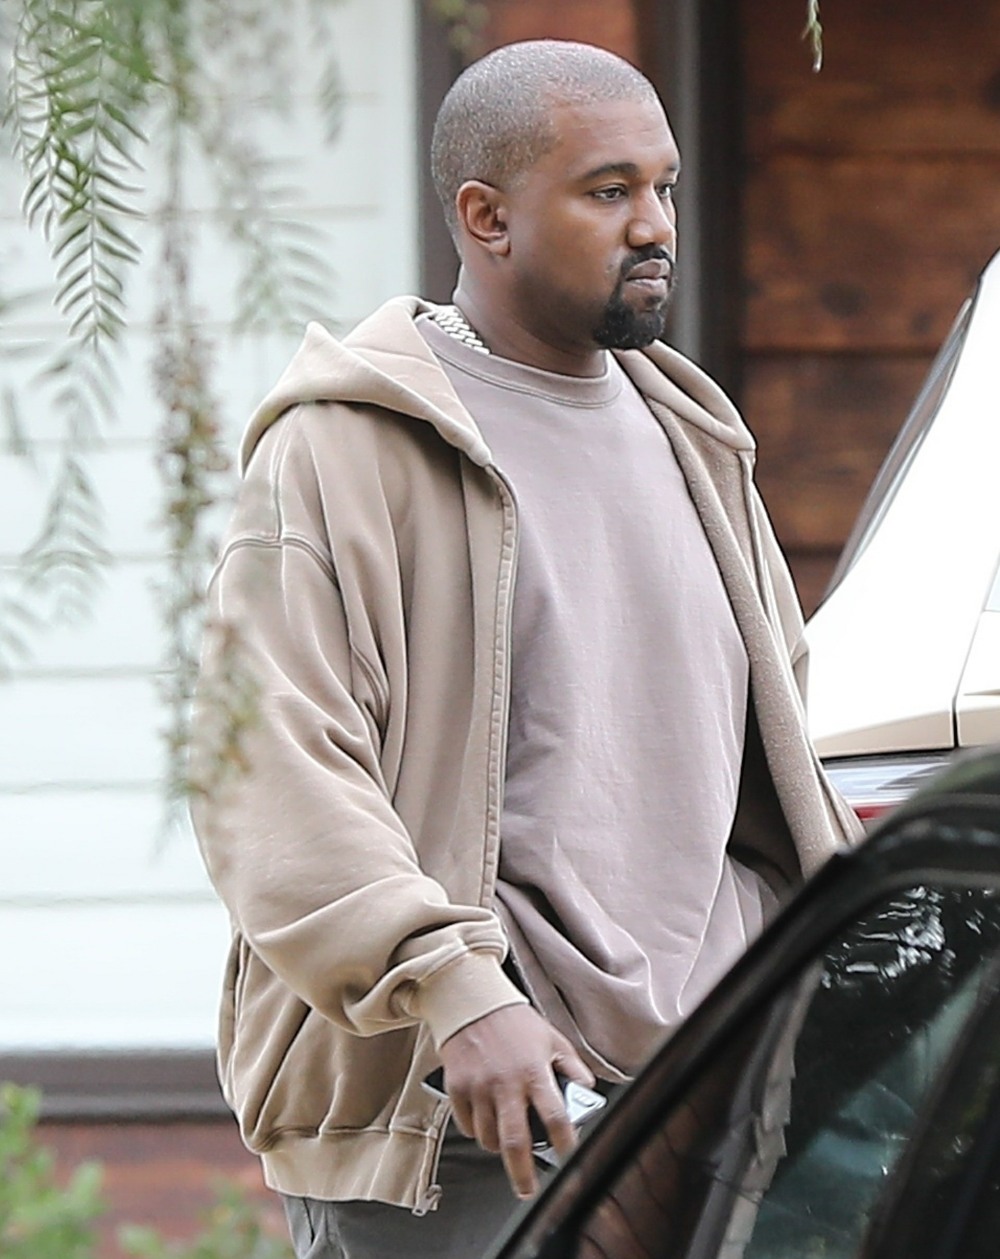 The Gospel of Yeezus: Kanye West is talking about starting his own church